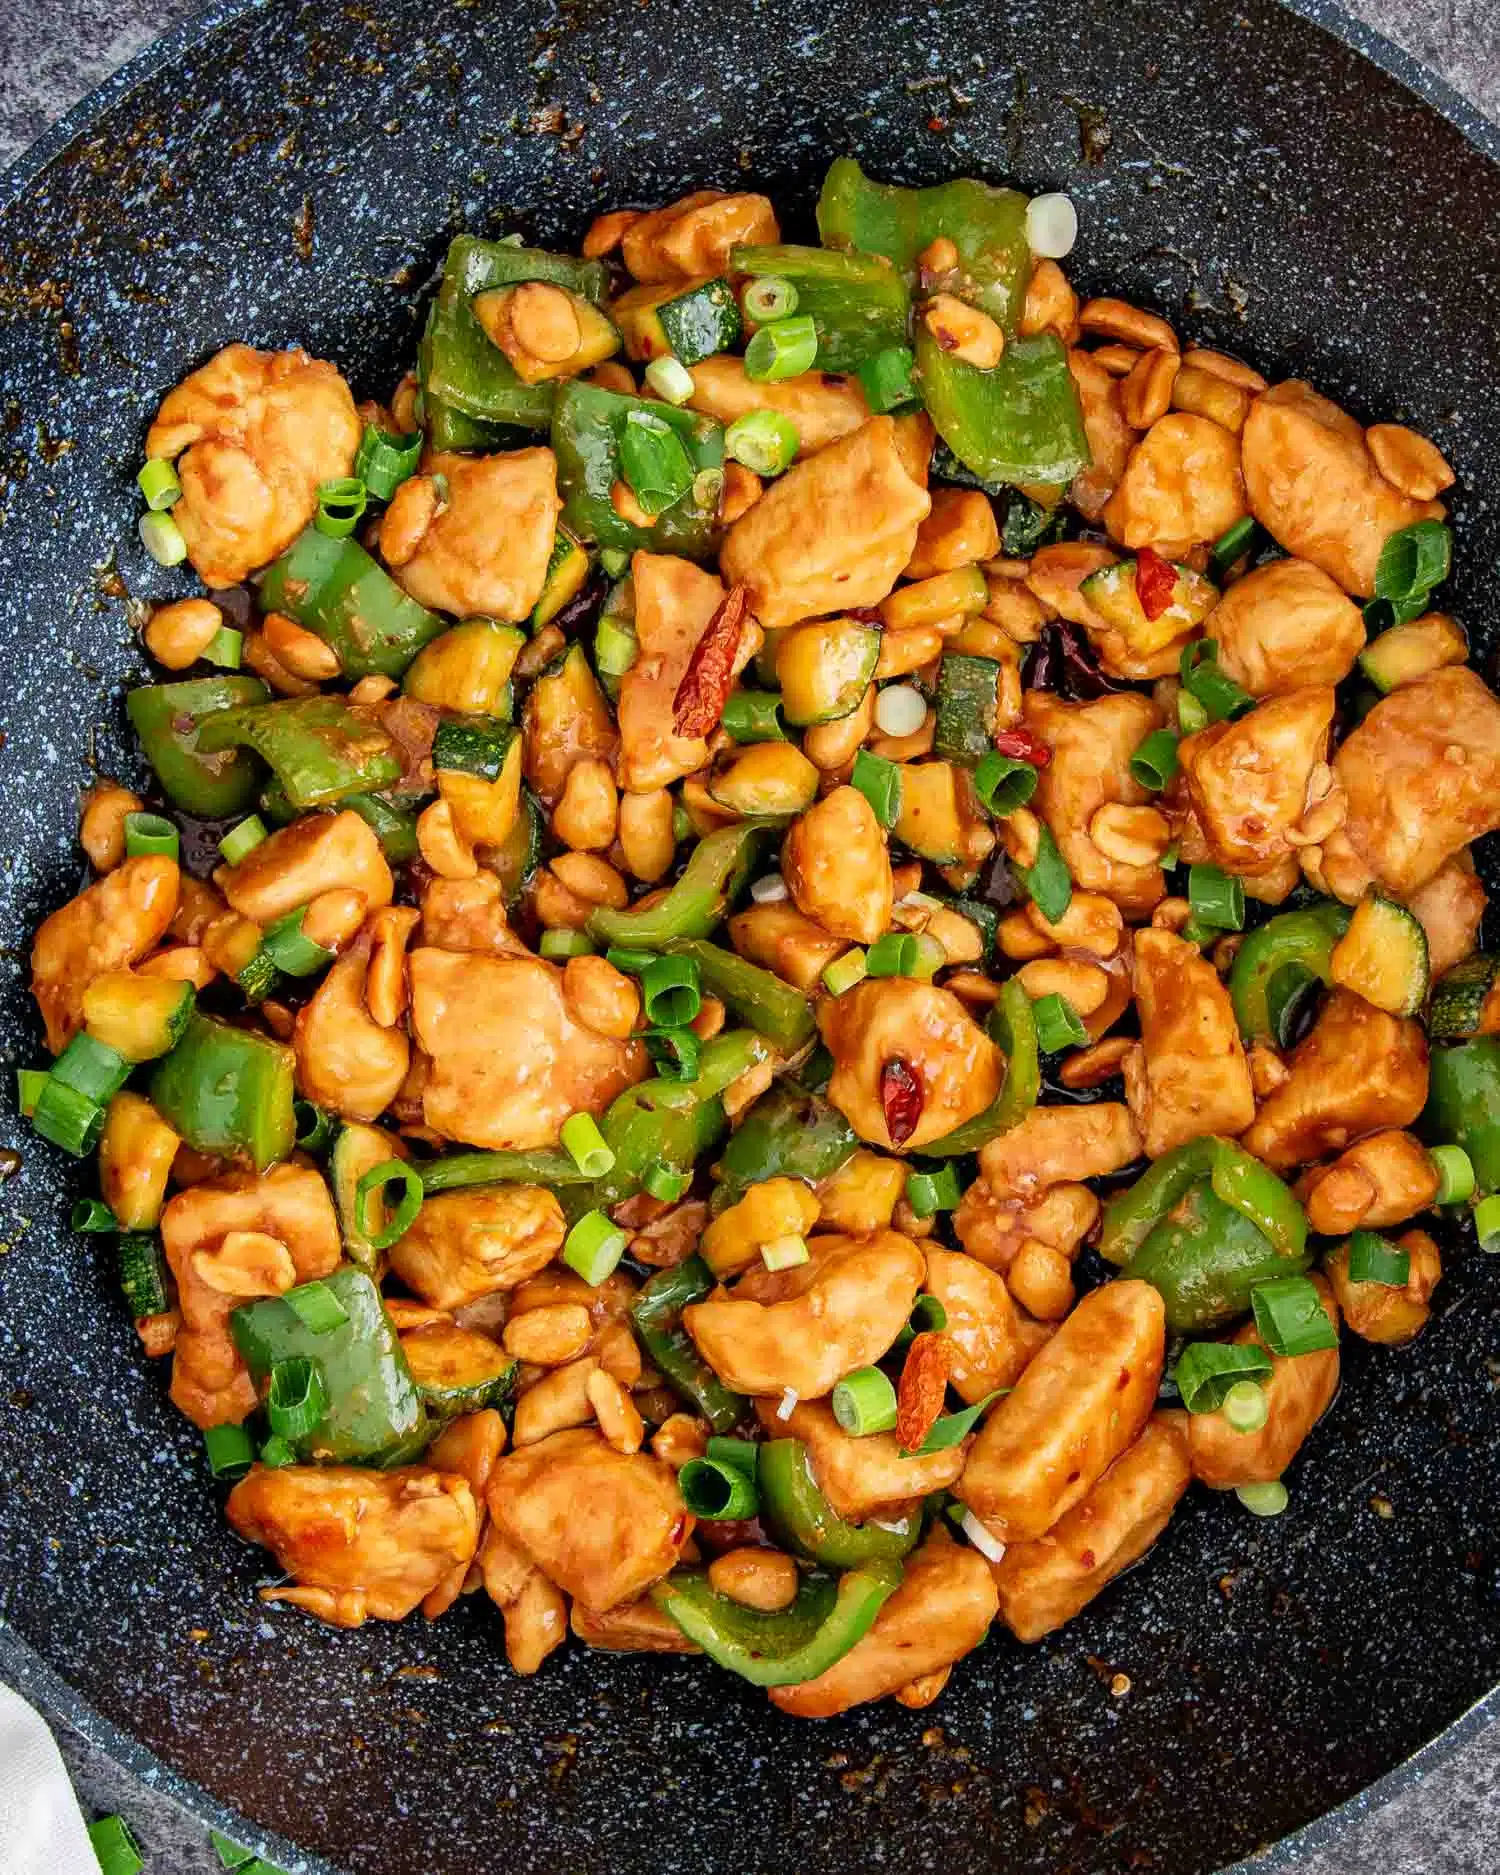 freshly made kung pao chicken in a wok.